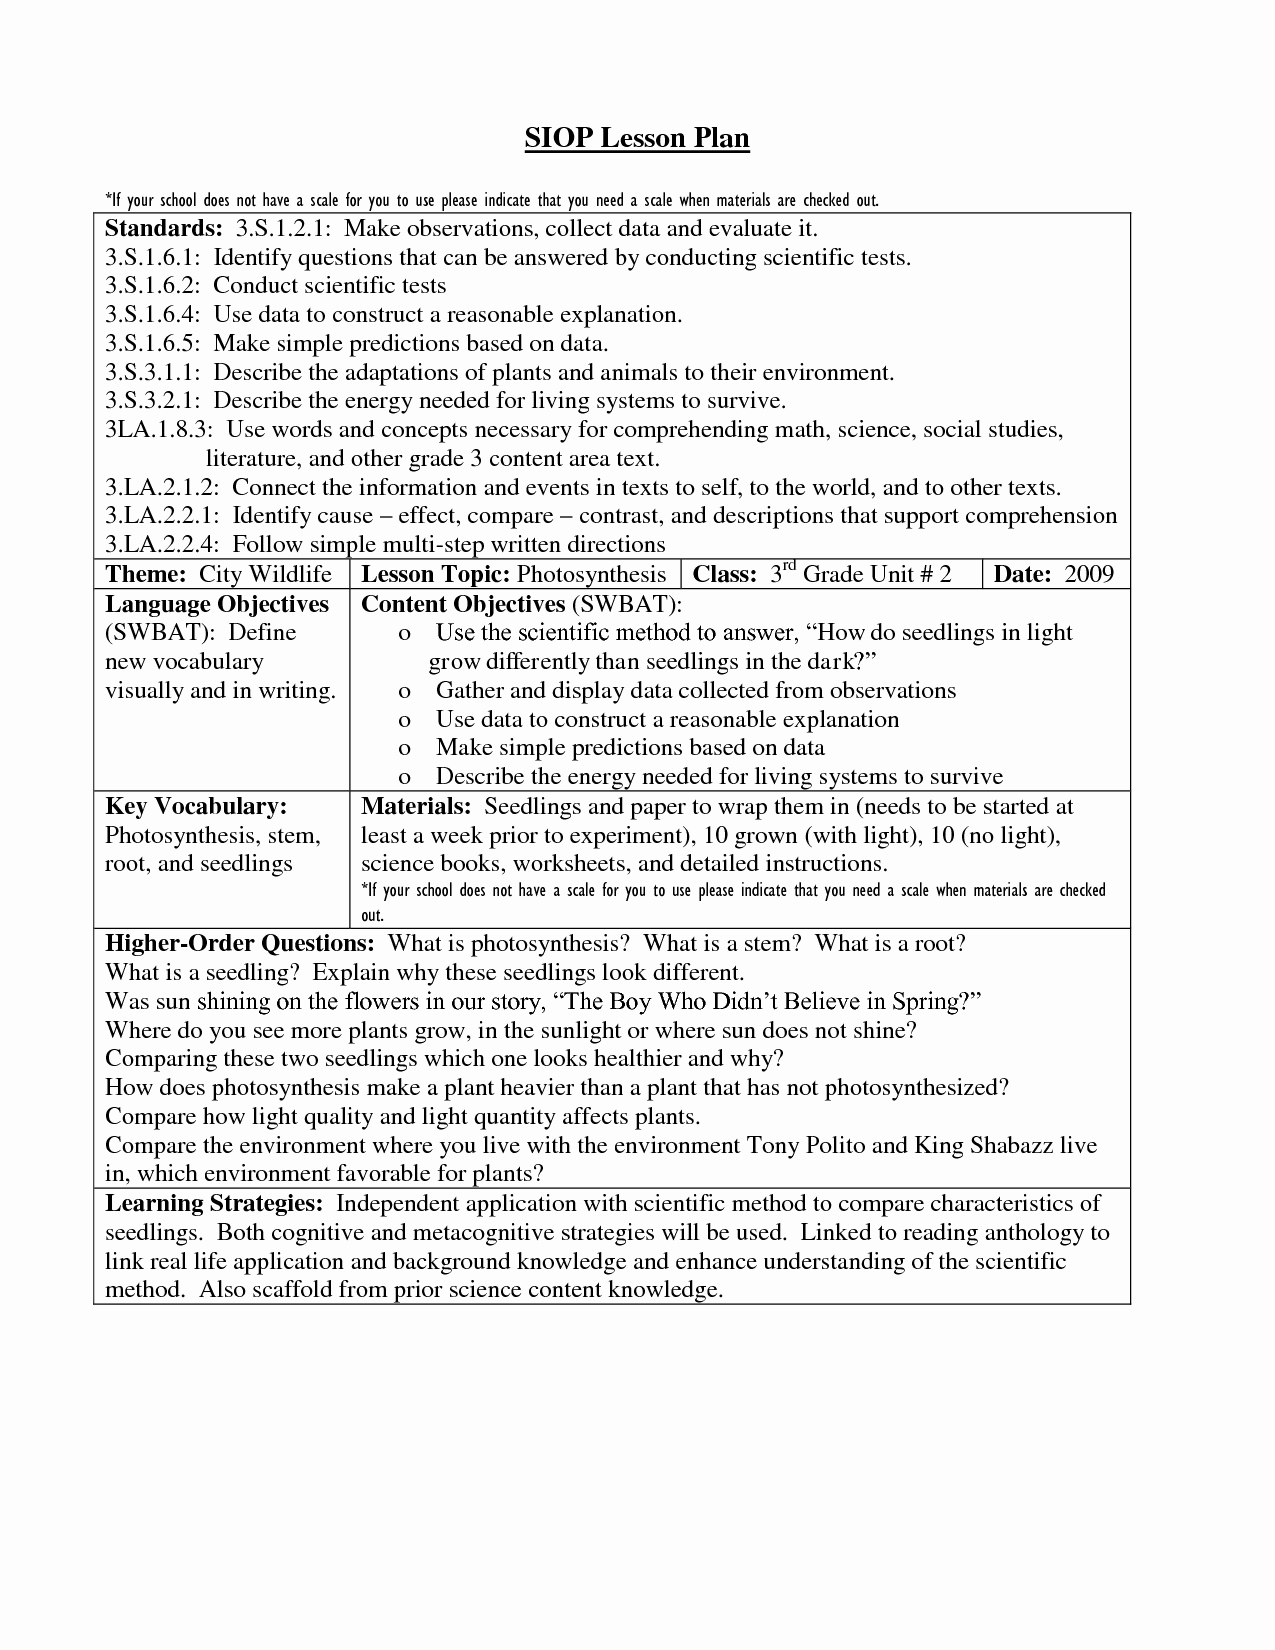 Siop Lesson Plan Template 3 New 26 Of for First Grade Reading Siop Lesson Plan